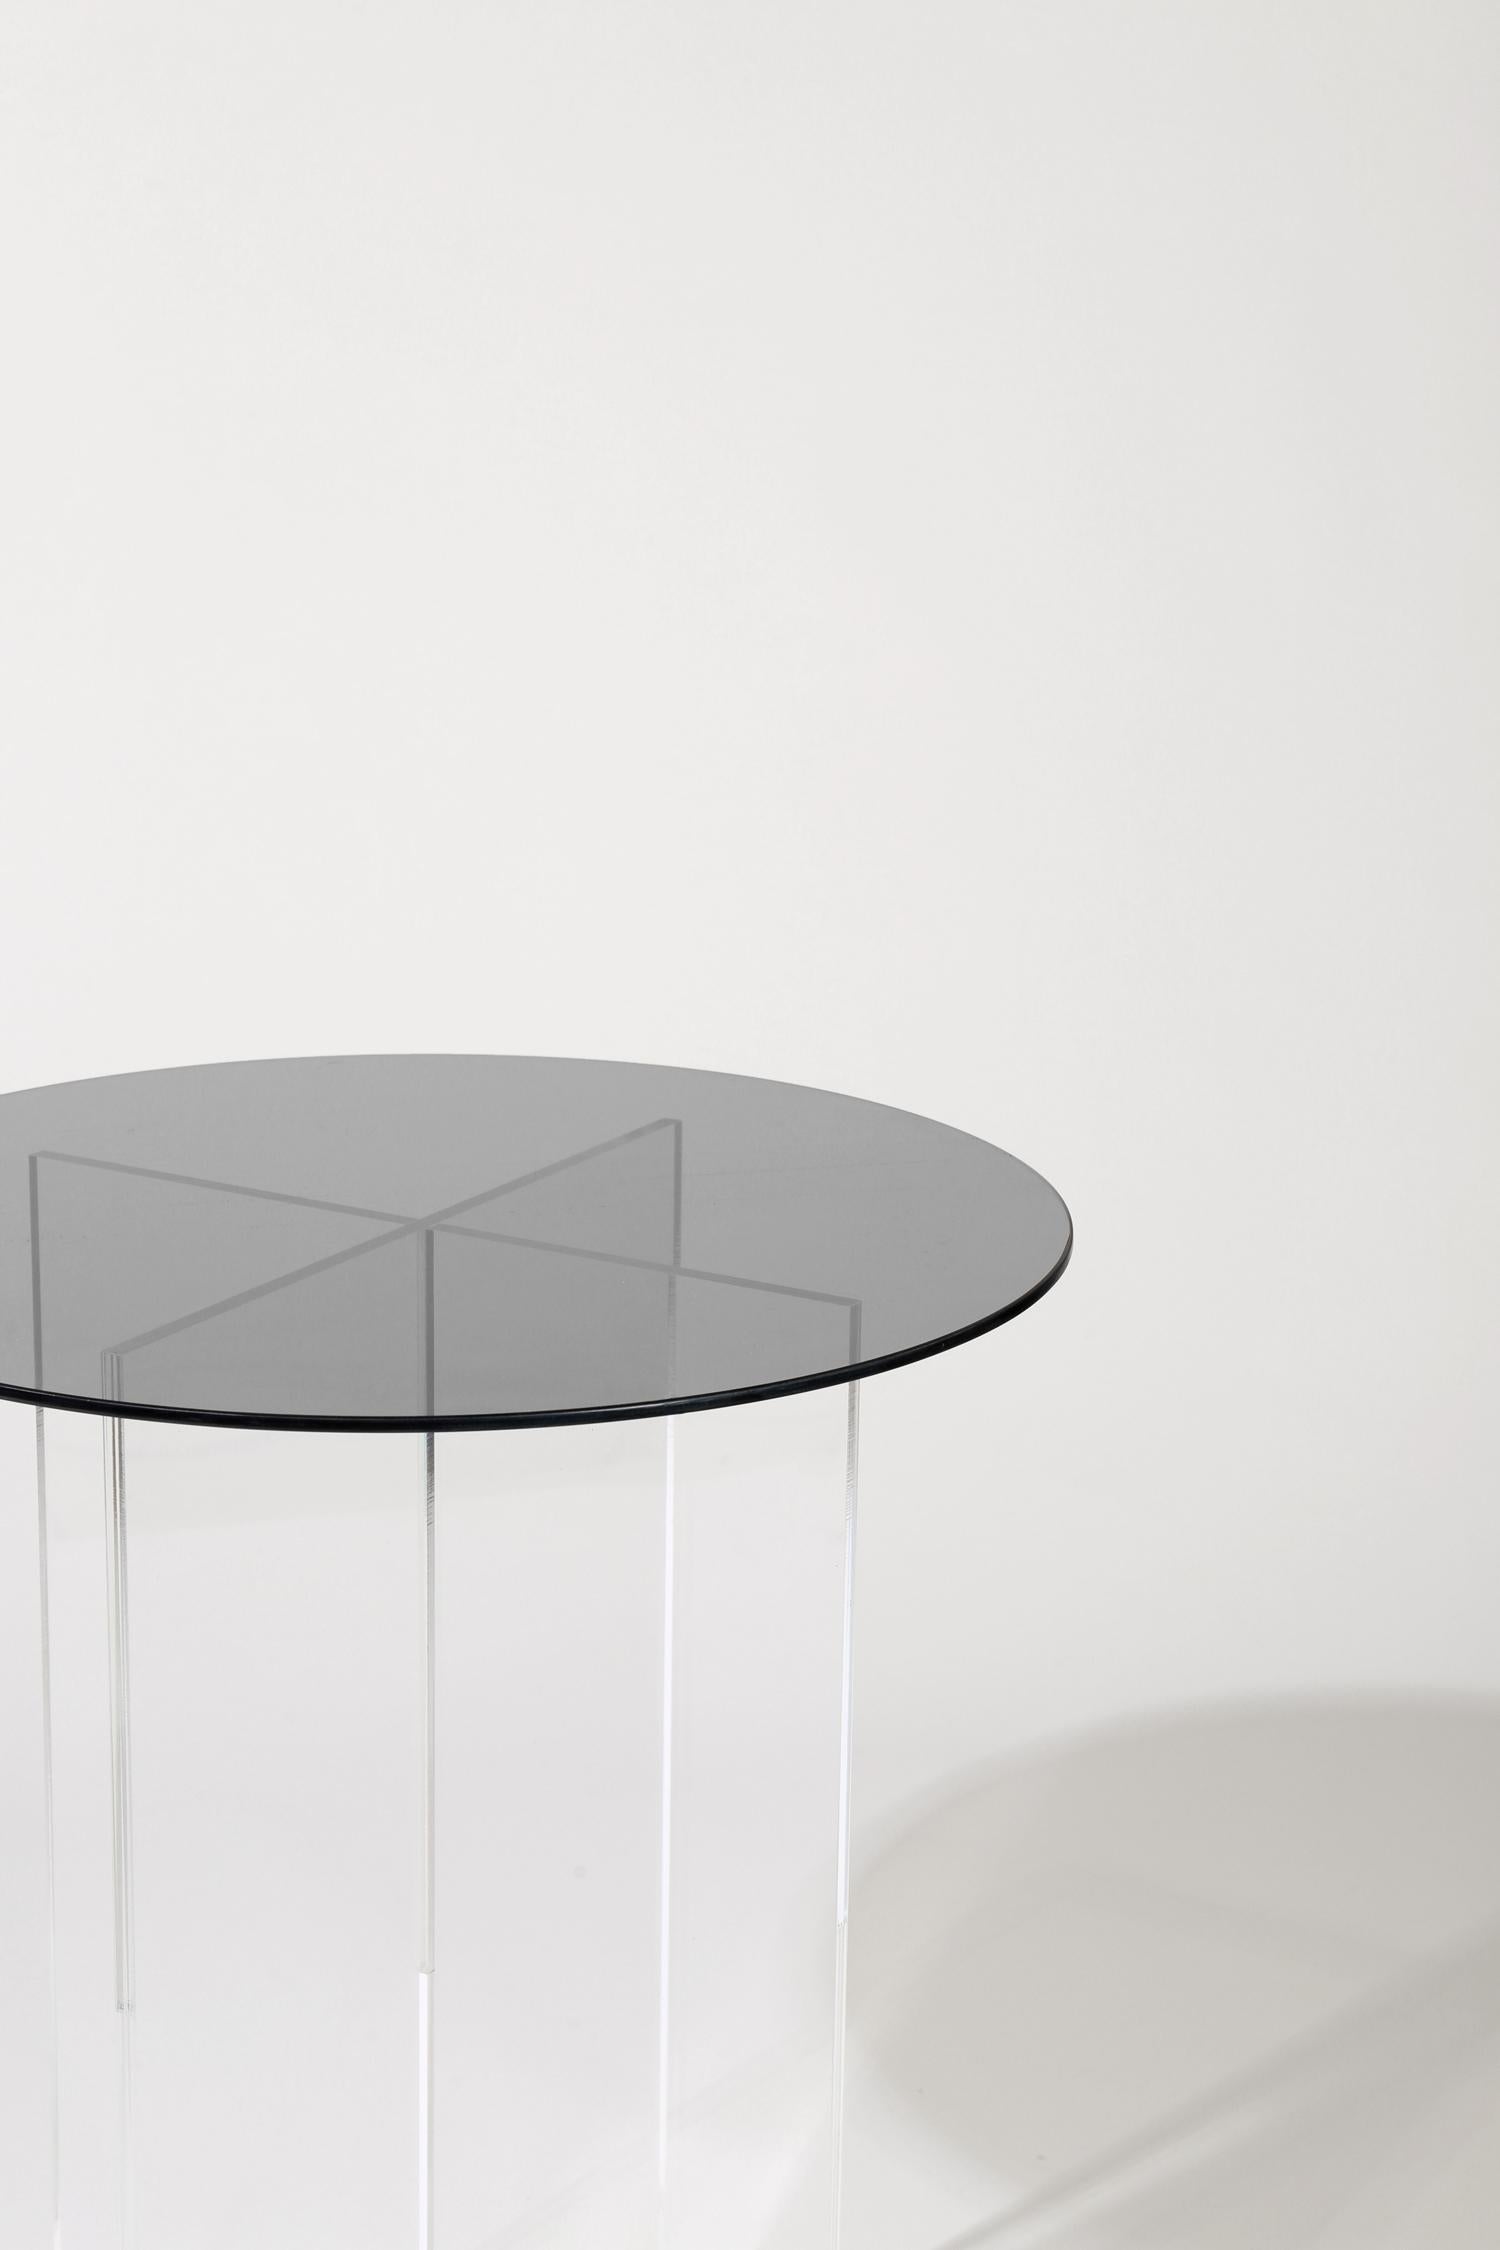 Made to order. Please allow 6 weeks for production.

The section side table is designed with clear vertical structures that give the appearance of floating horizontal spans. The effect is subtle with all clear glass or can be accentuated with